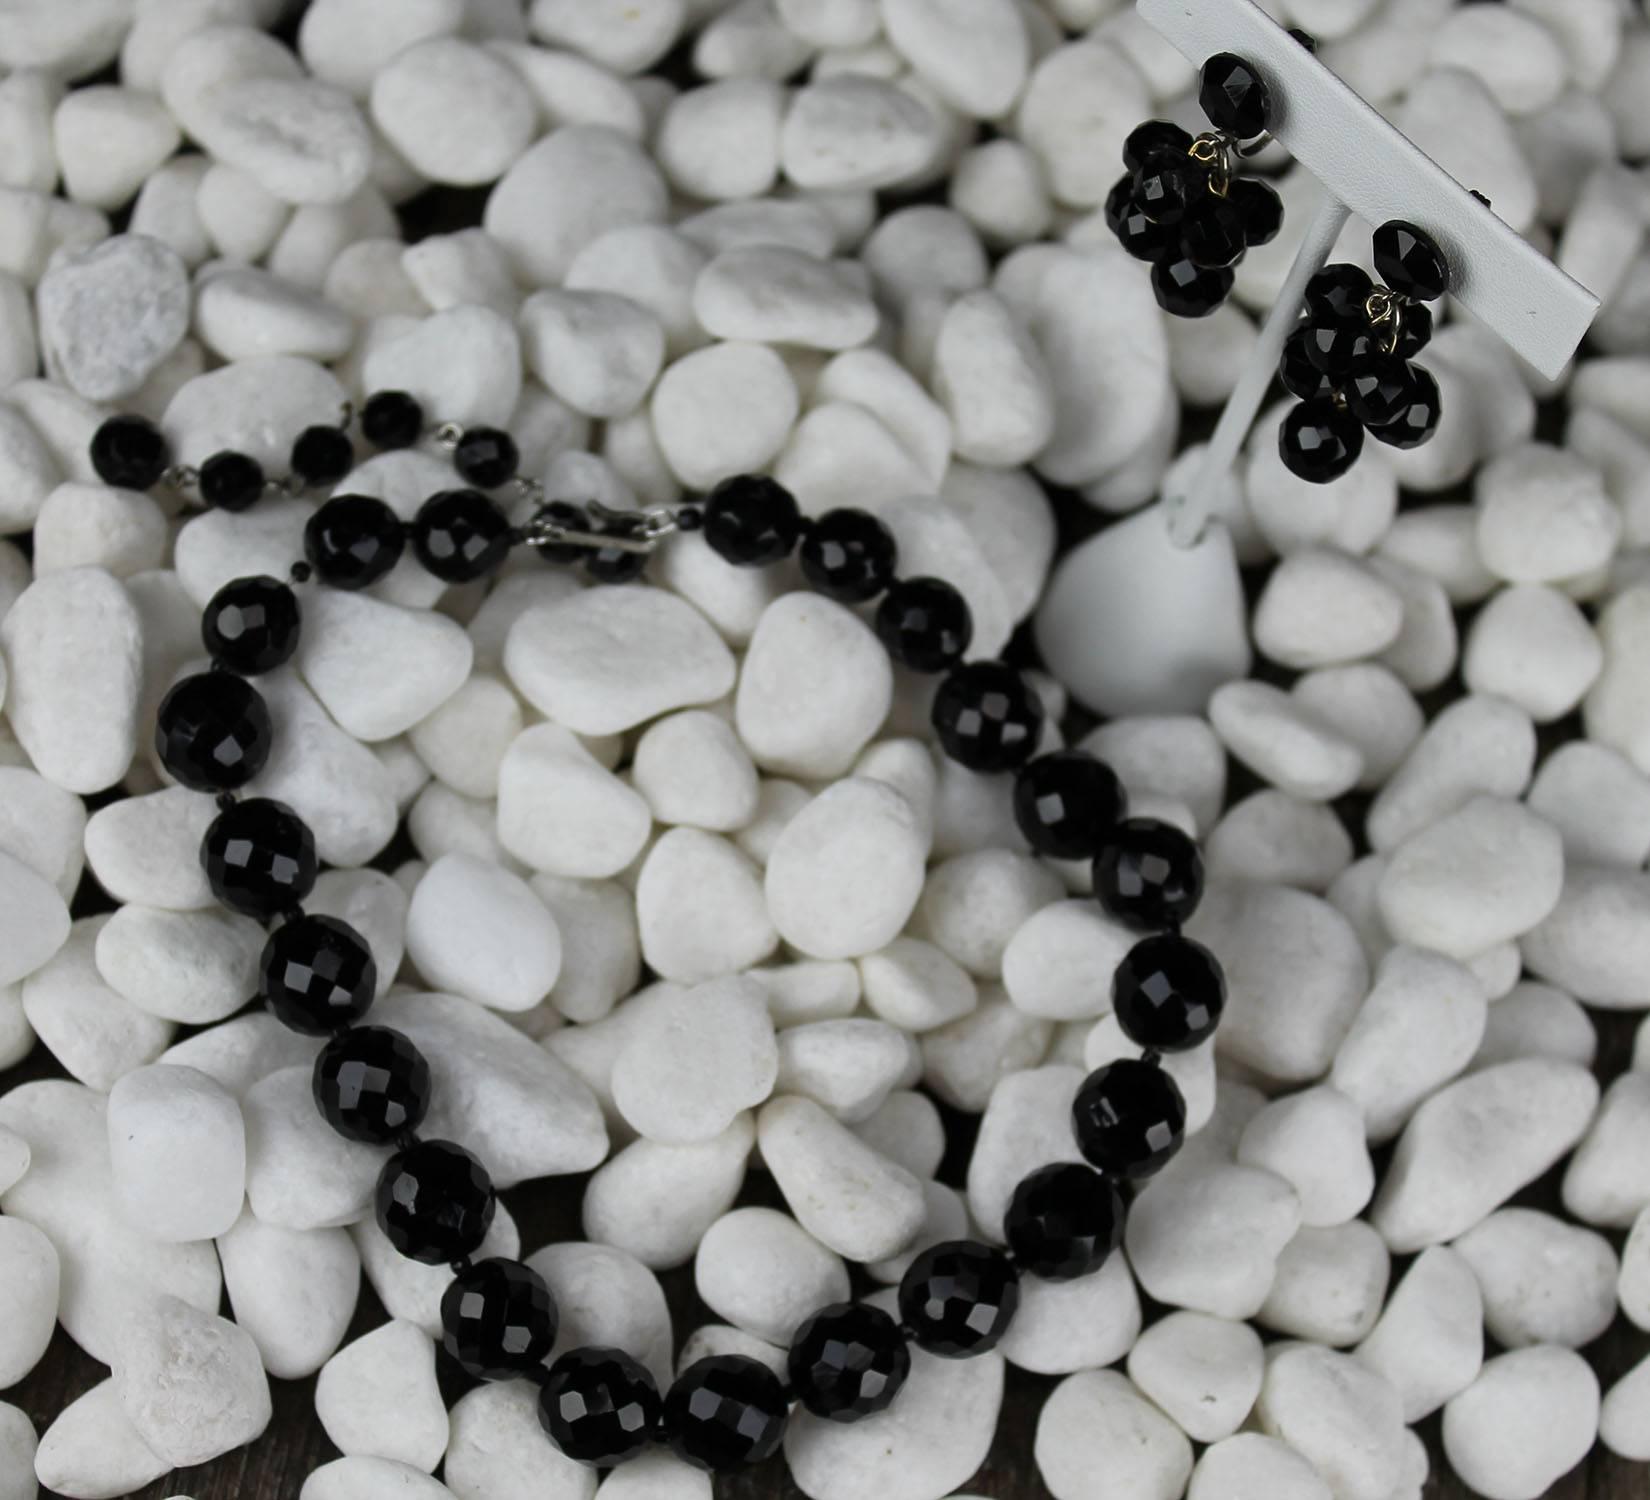 Beautiful and Classic jet black faceted glass bead choker necklace and dangle earrings by Hobé. The set is in wonderful vintage condition.

Incredible! Just take a close look at this wonderful, circa 1950s vintage Hobé jet black faceted glass